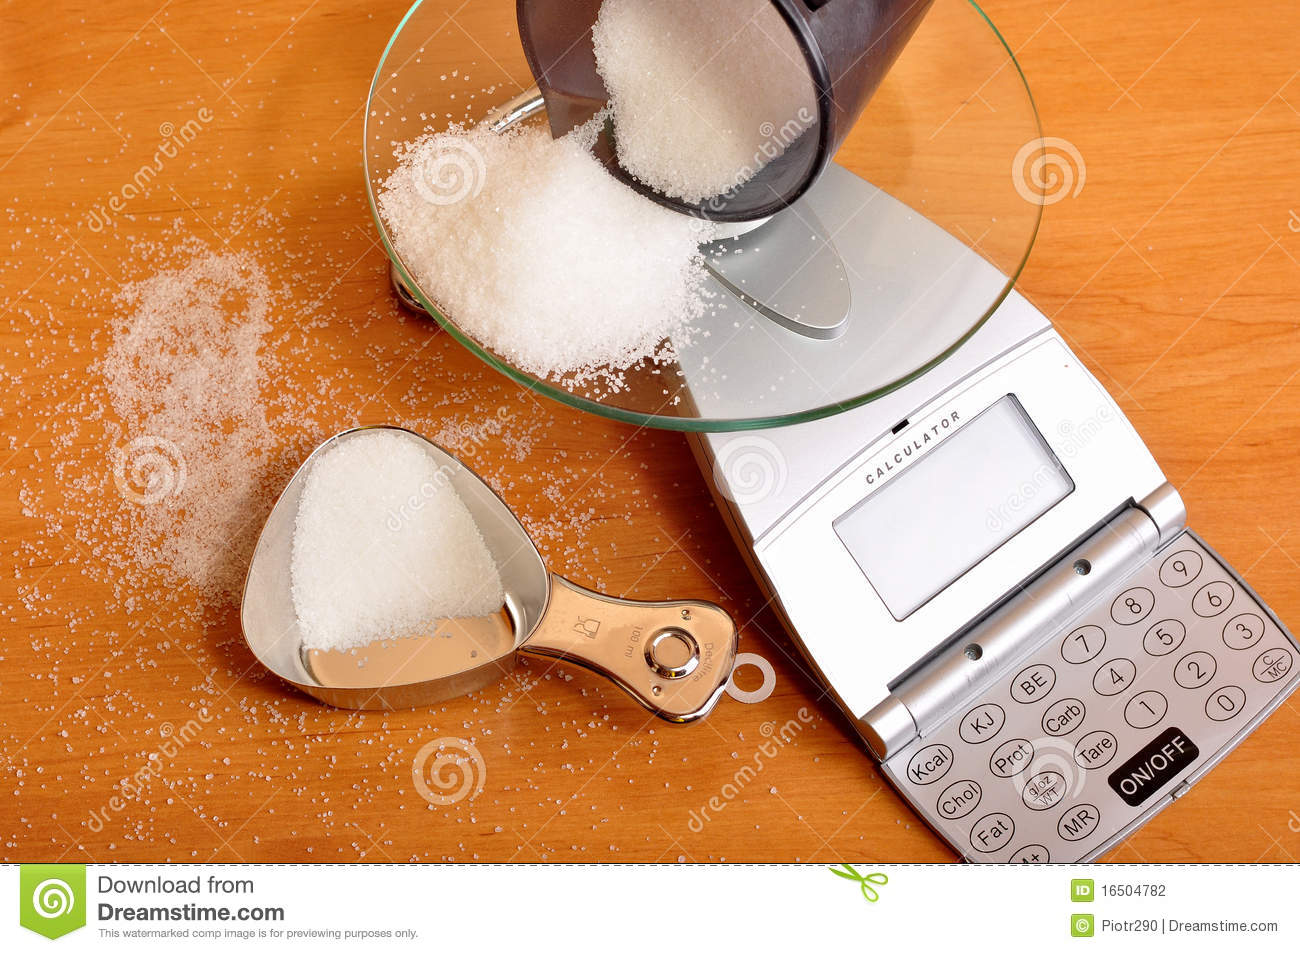 Weighing Sugar On Scale  Stock Photography   Image  16504782